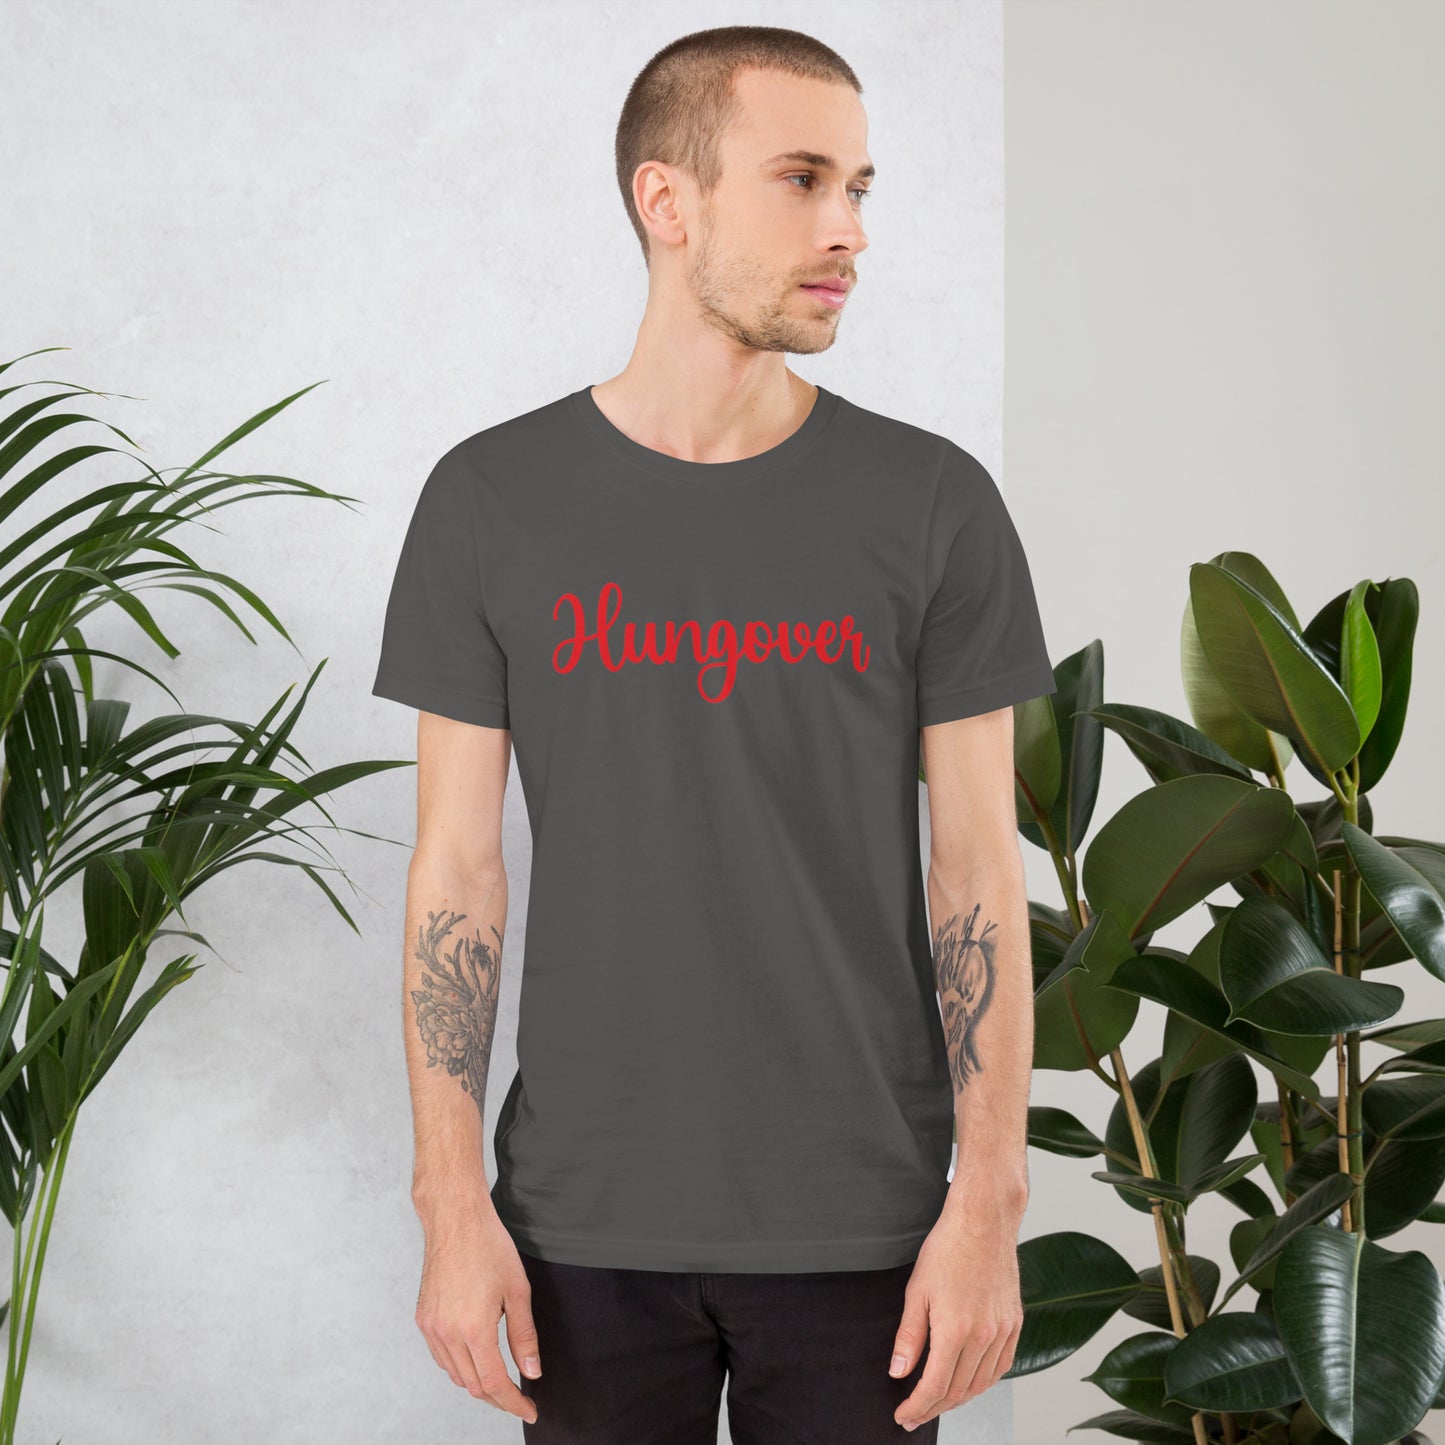 Hungover Unisex t-shirt